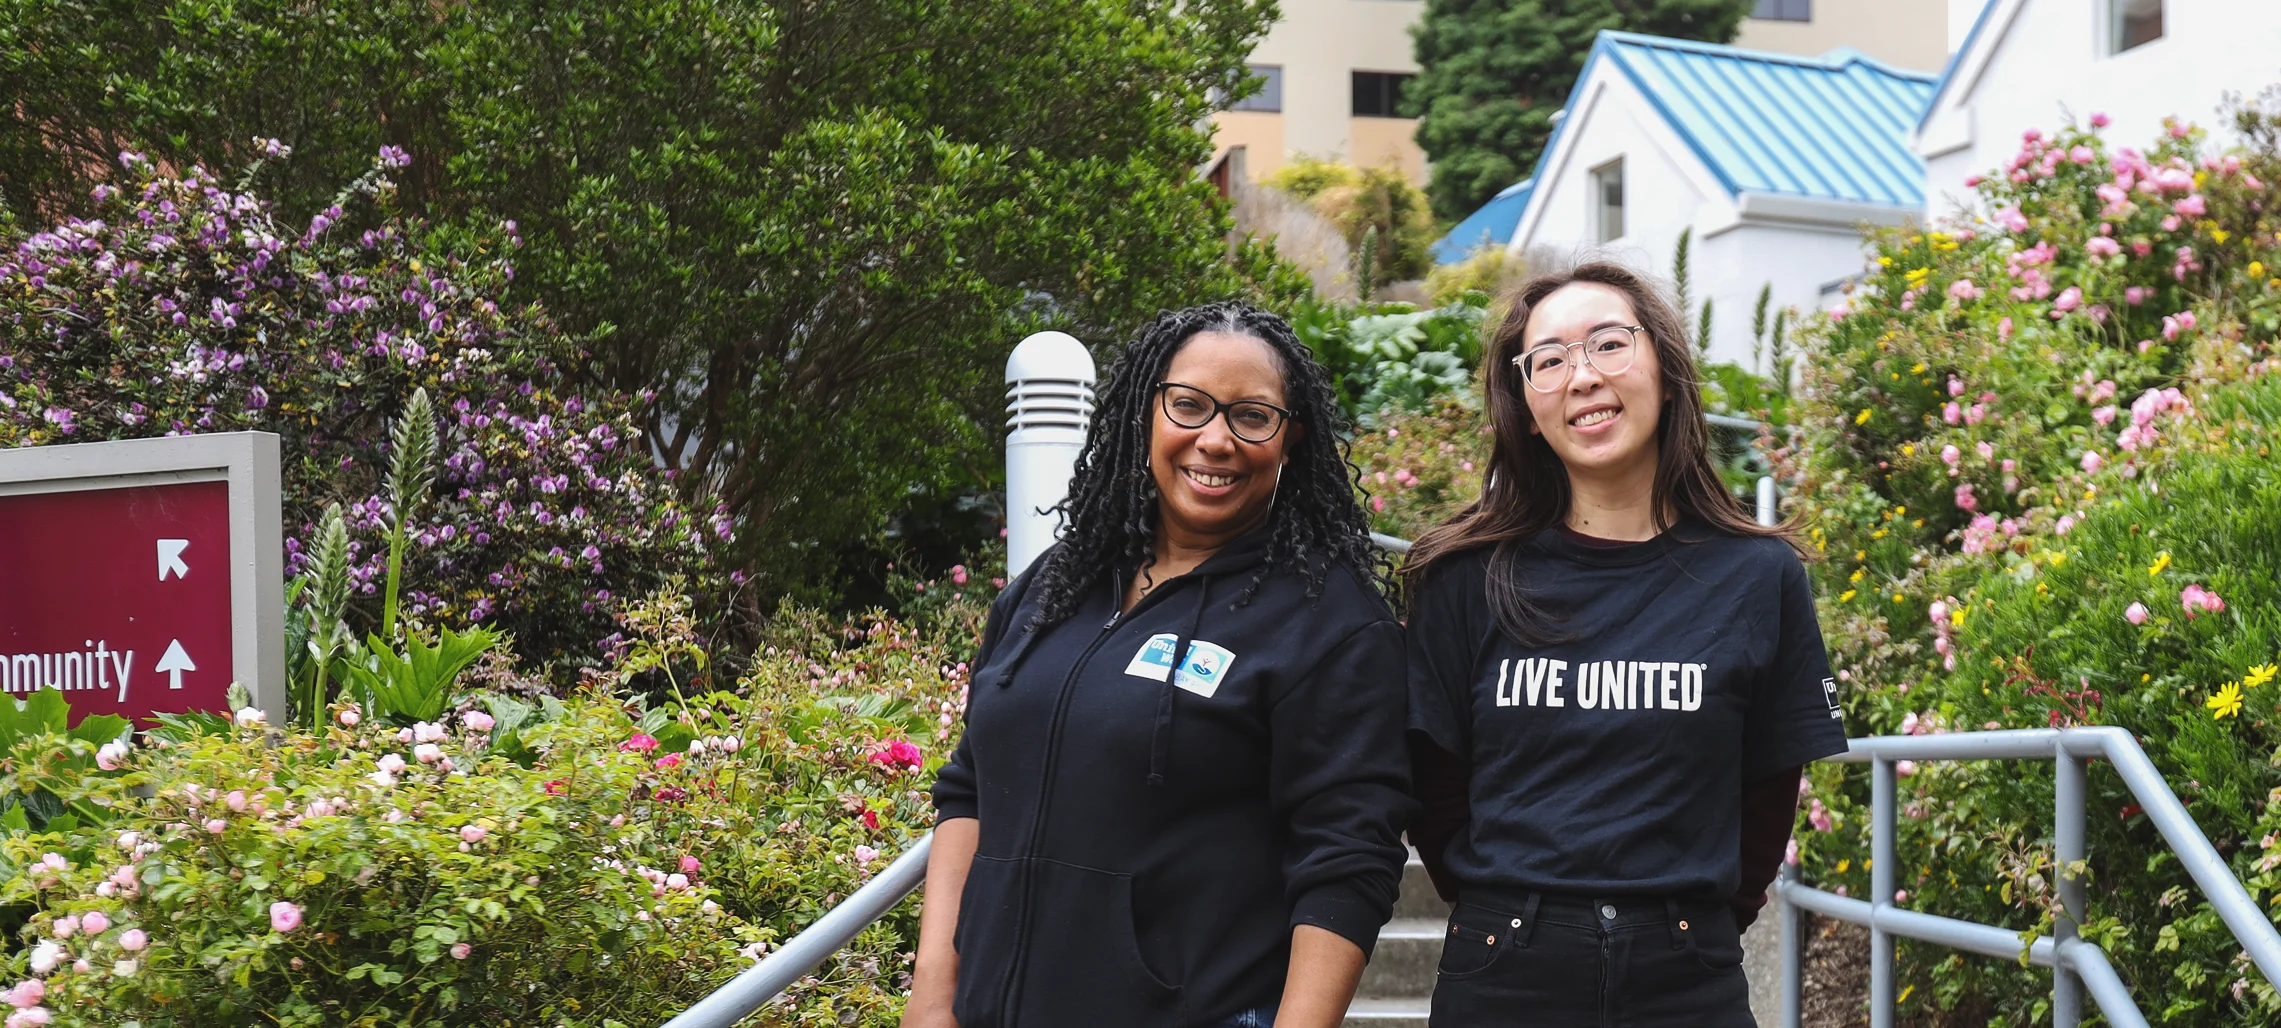 Two young female presenting individuals wearing black shirts with United Way Bay Area branding smiling at the camera.